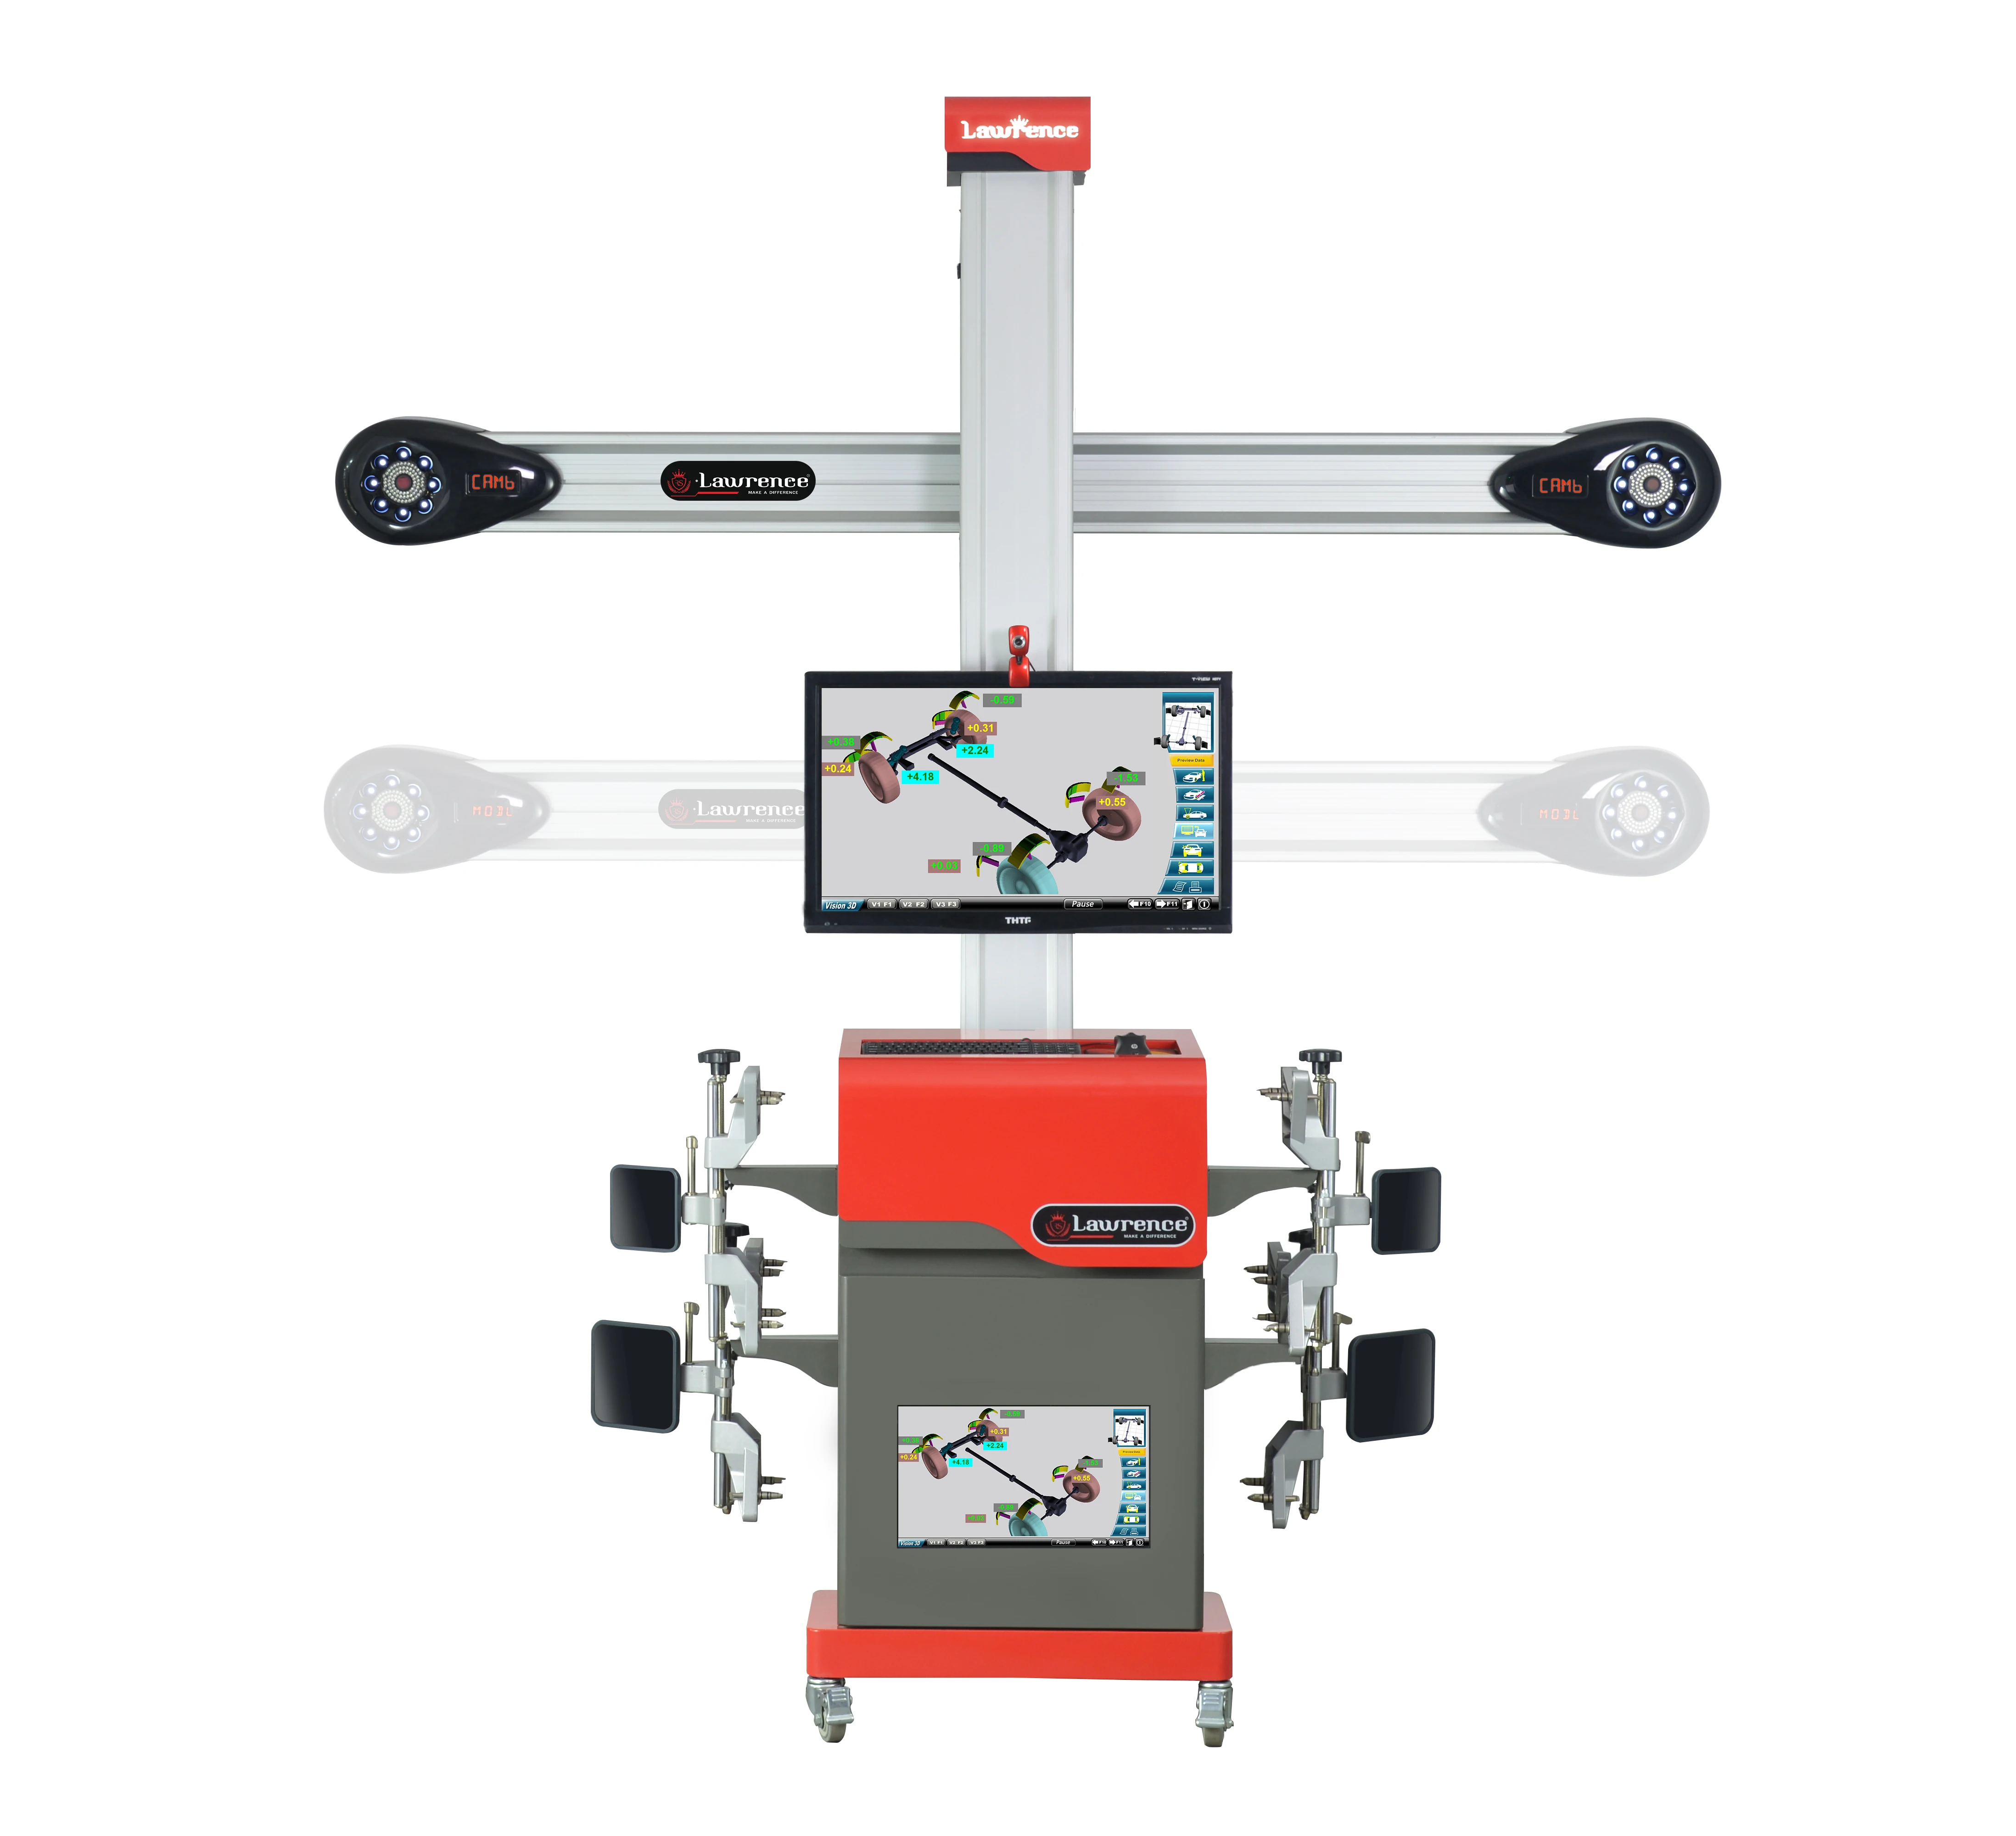 New design dual screen wheel alignment and four post car lift cmbo for workshop and vehicle equipment (1600557917949)